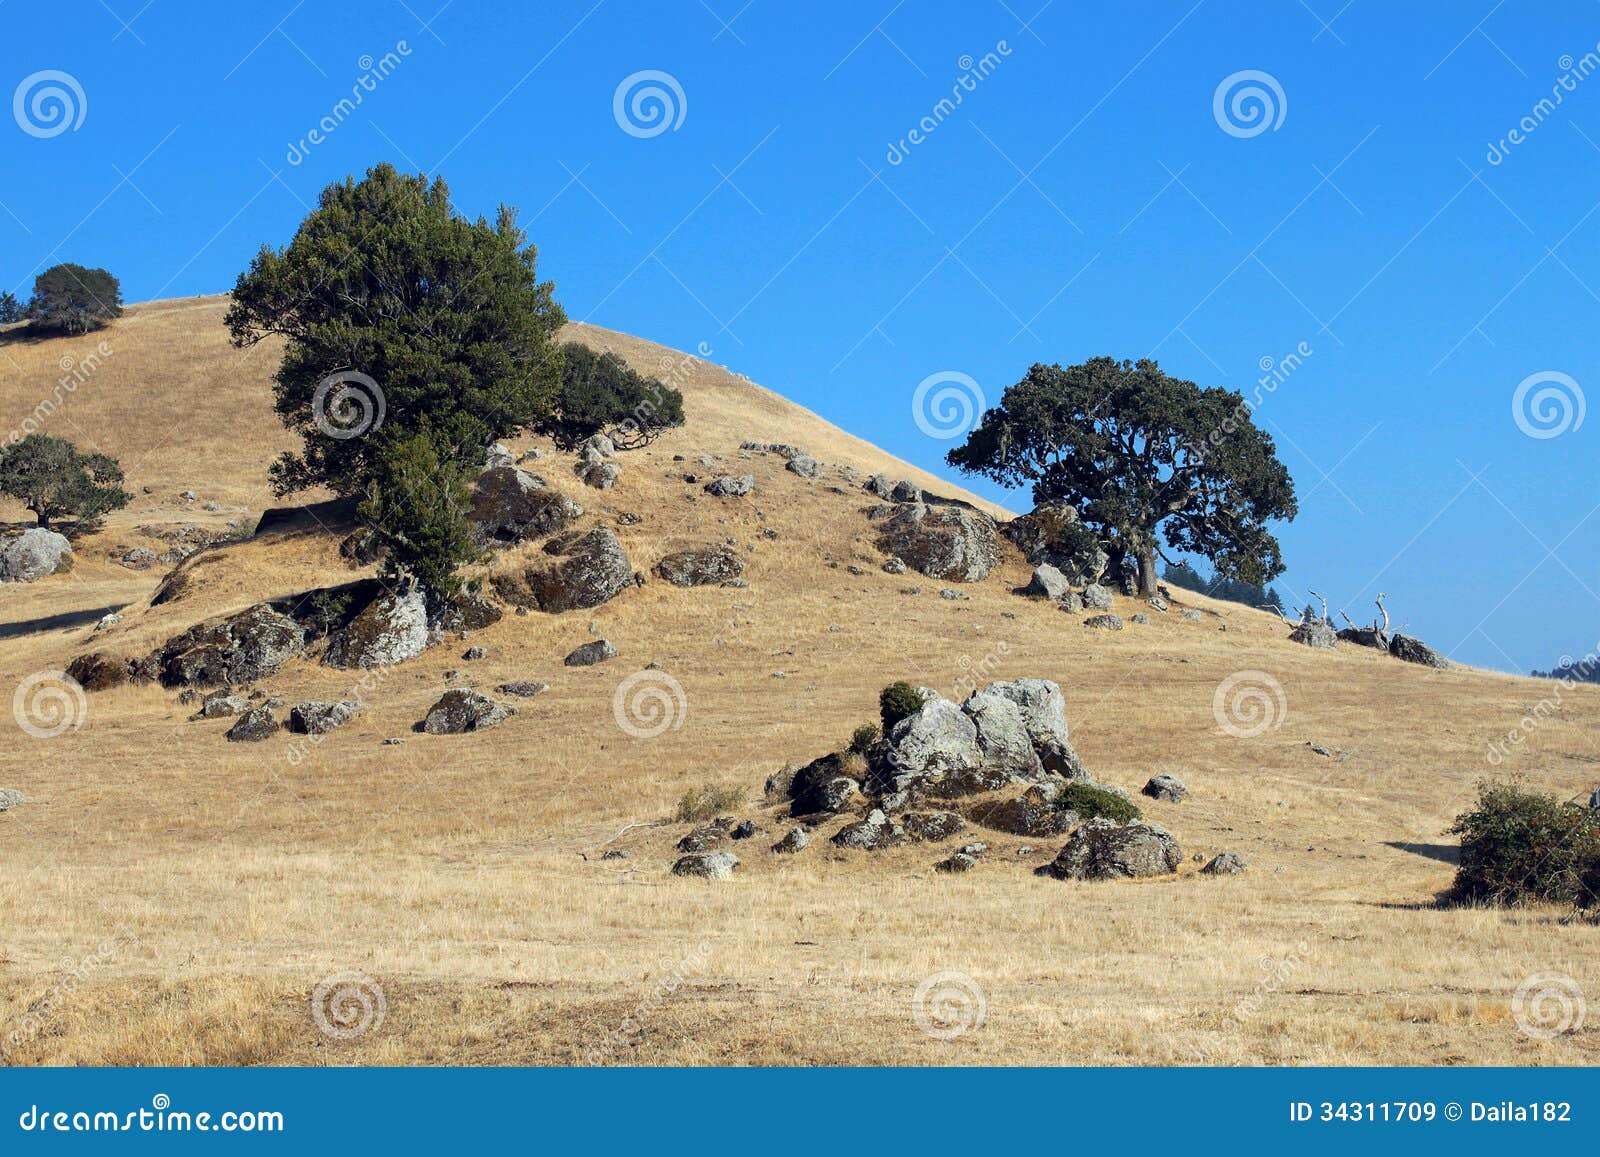 Northern California Landscape Royalty Free Stock Images 